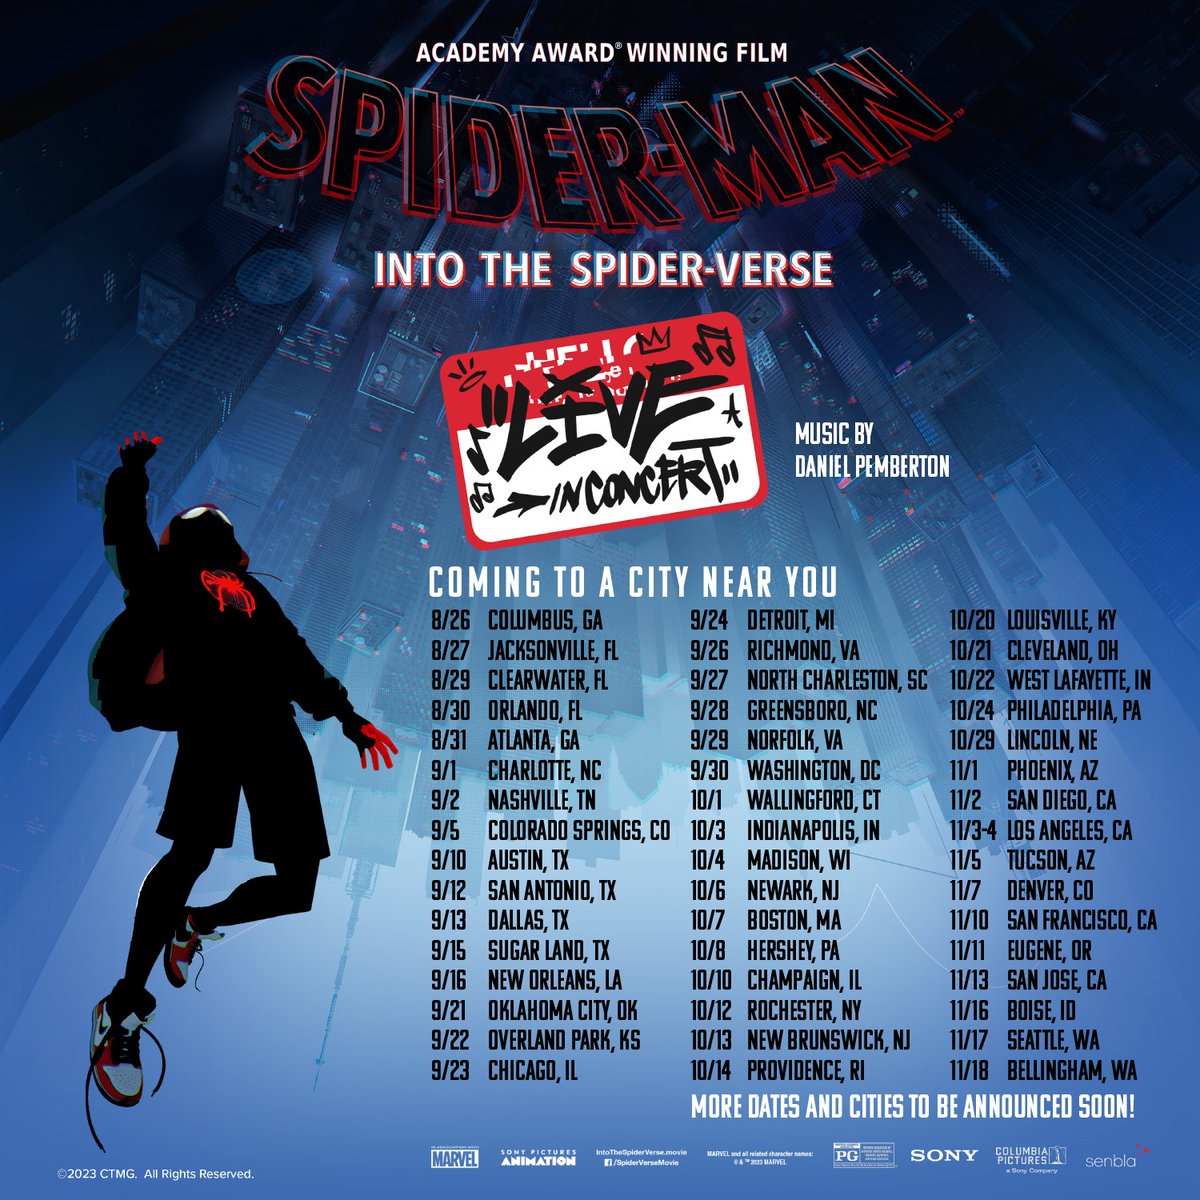 Spider-Man: Into the #SpiderVerse Live in Concert swinging soon to a theater near you. For ticket information, visit SpiderVerseInConcert.com.